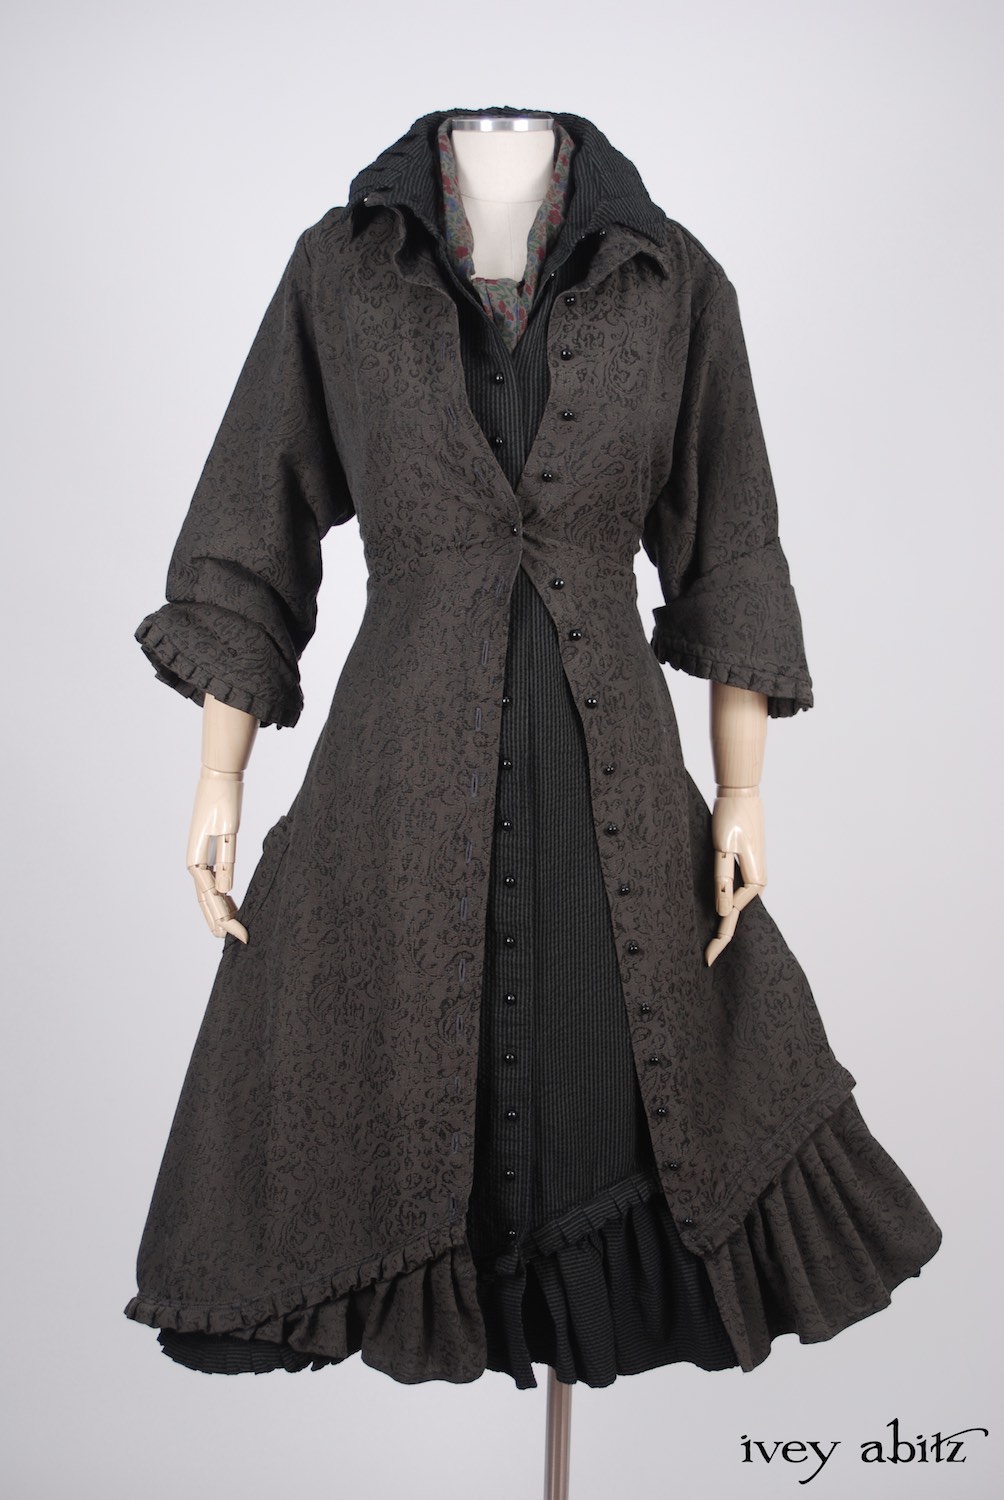 Ivey Abitz - Wilhemena Duster Coat in Moonlit Meadow Vine Weave  - Wilhemena Frock in Moonlit Meadow Puckered Striped Cotton  - Clotaire Sash in Peony Meadow Cotton Voile